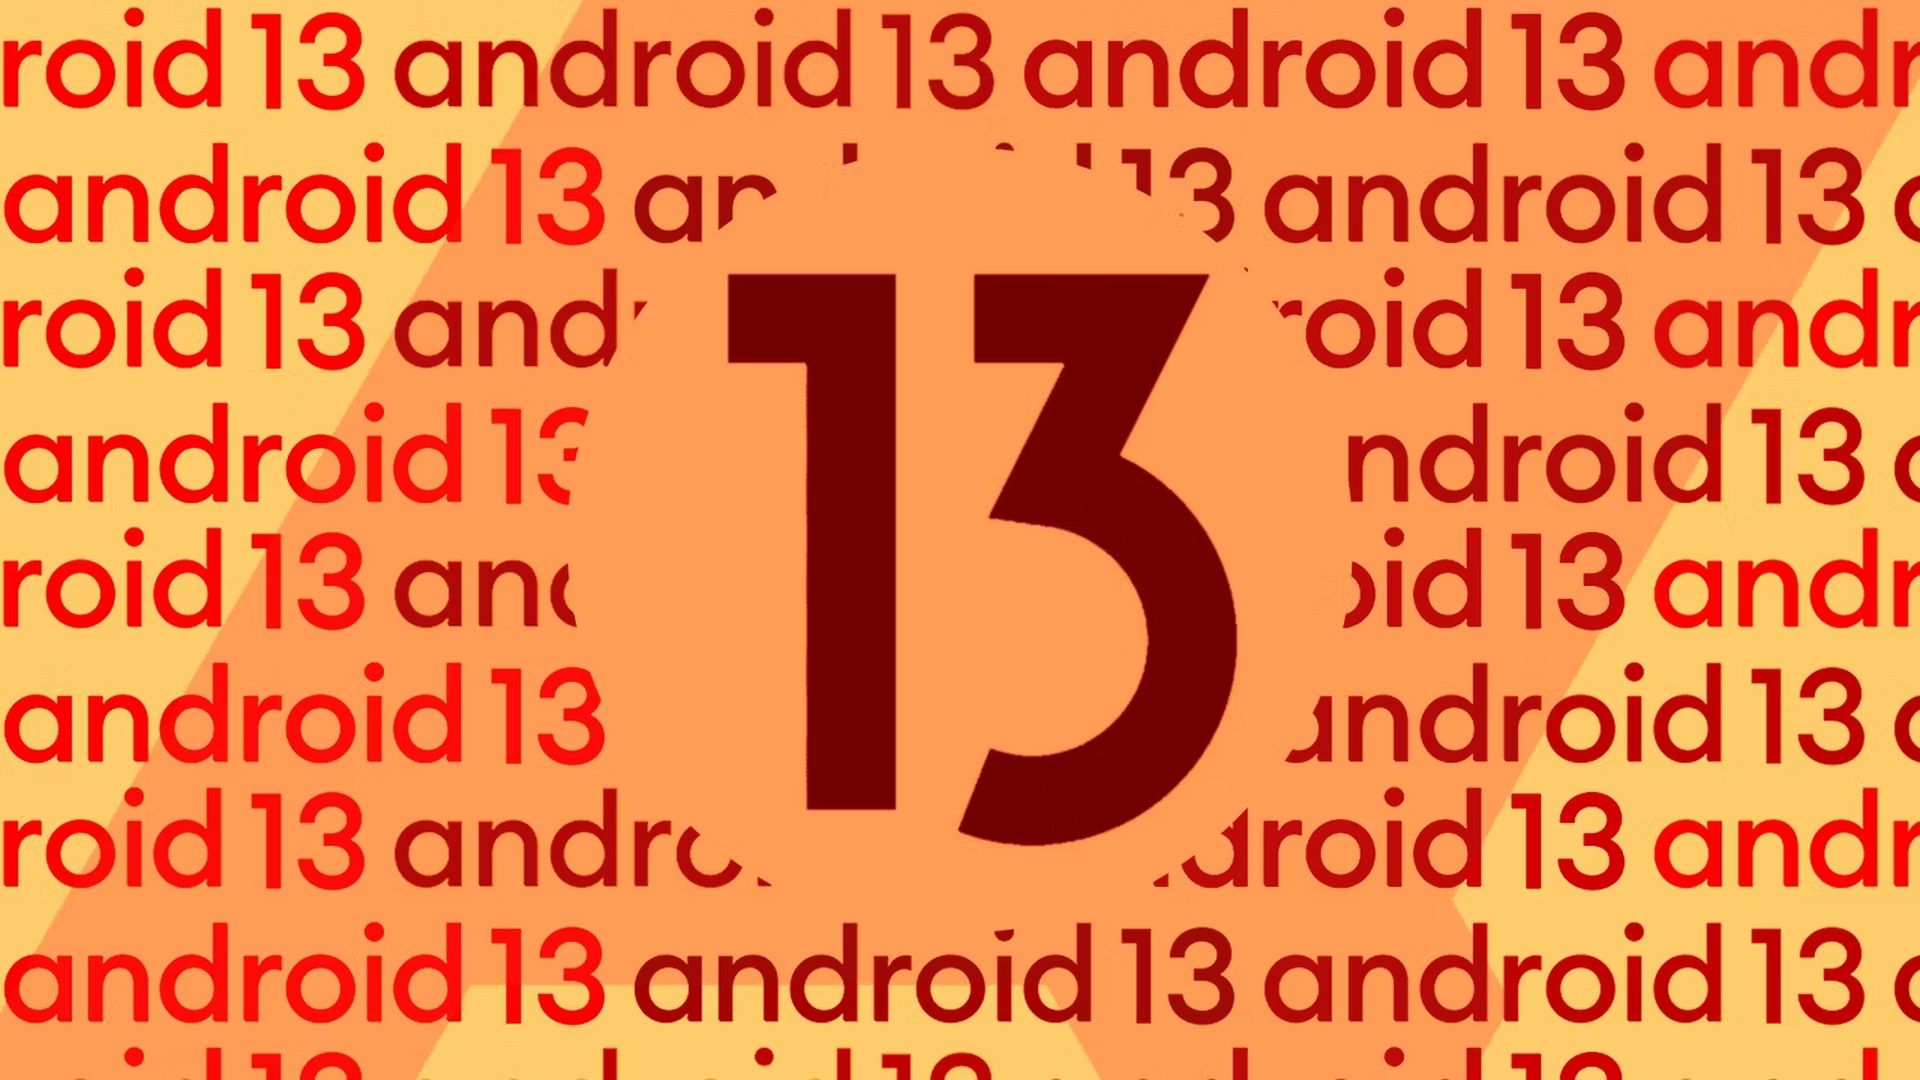 In this article, we are going to be covering the Android 13 update list for all of the brands, so you can learn if your phone will be updated to Android 13.